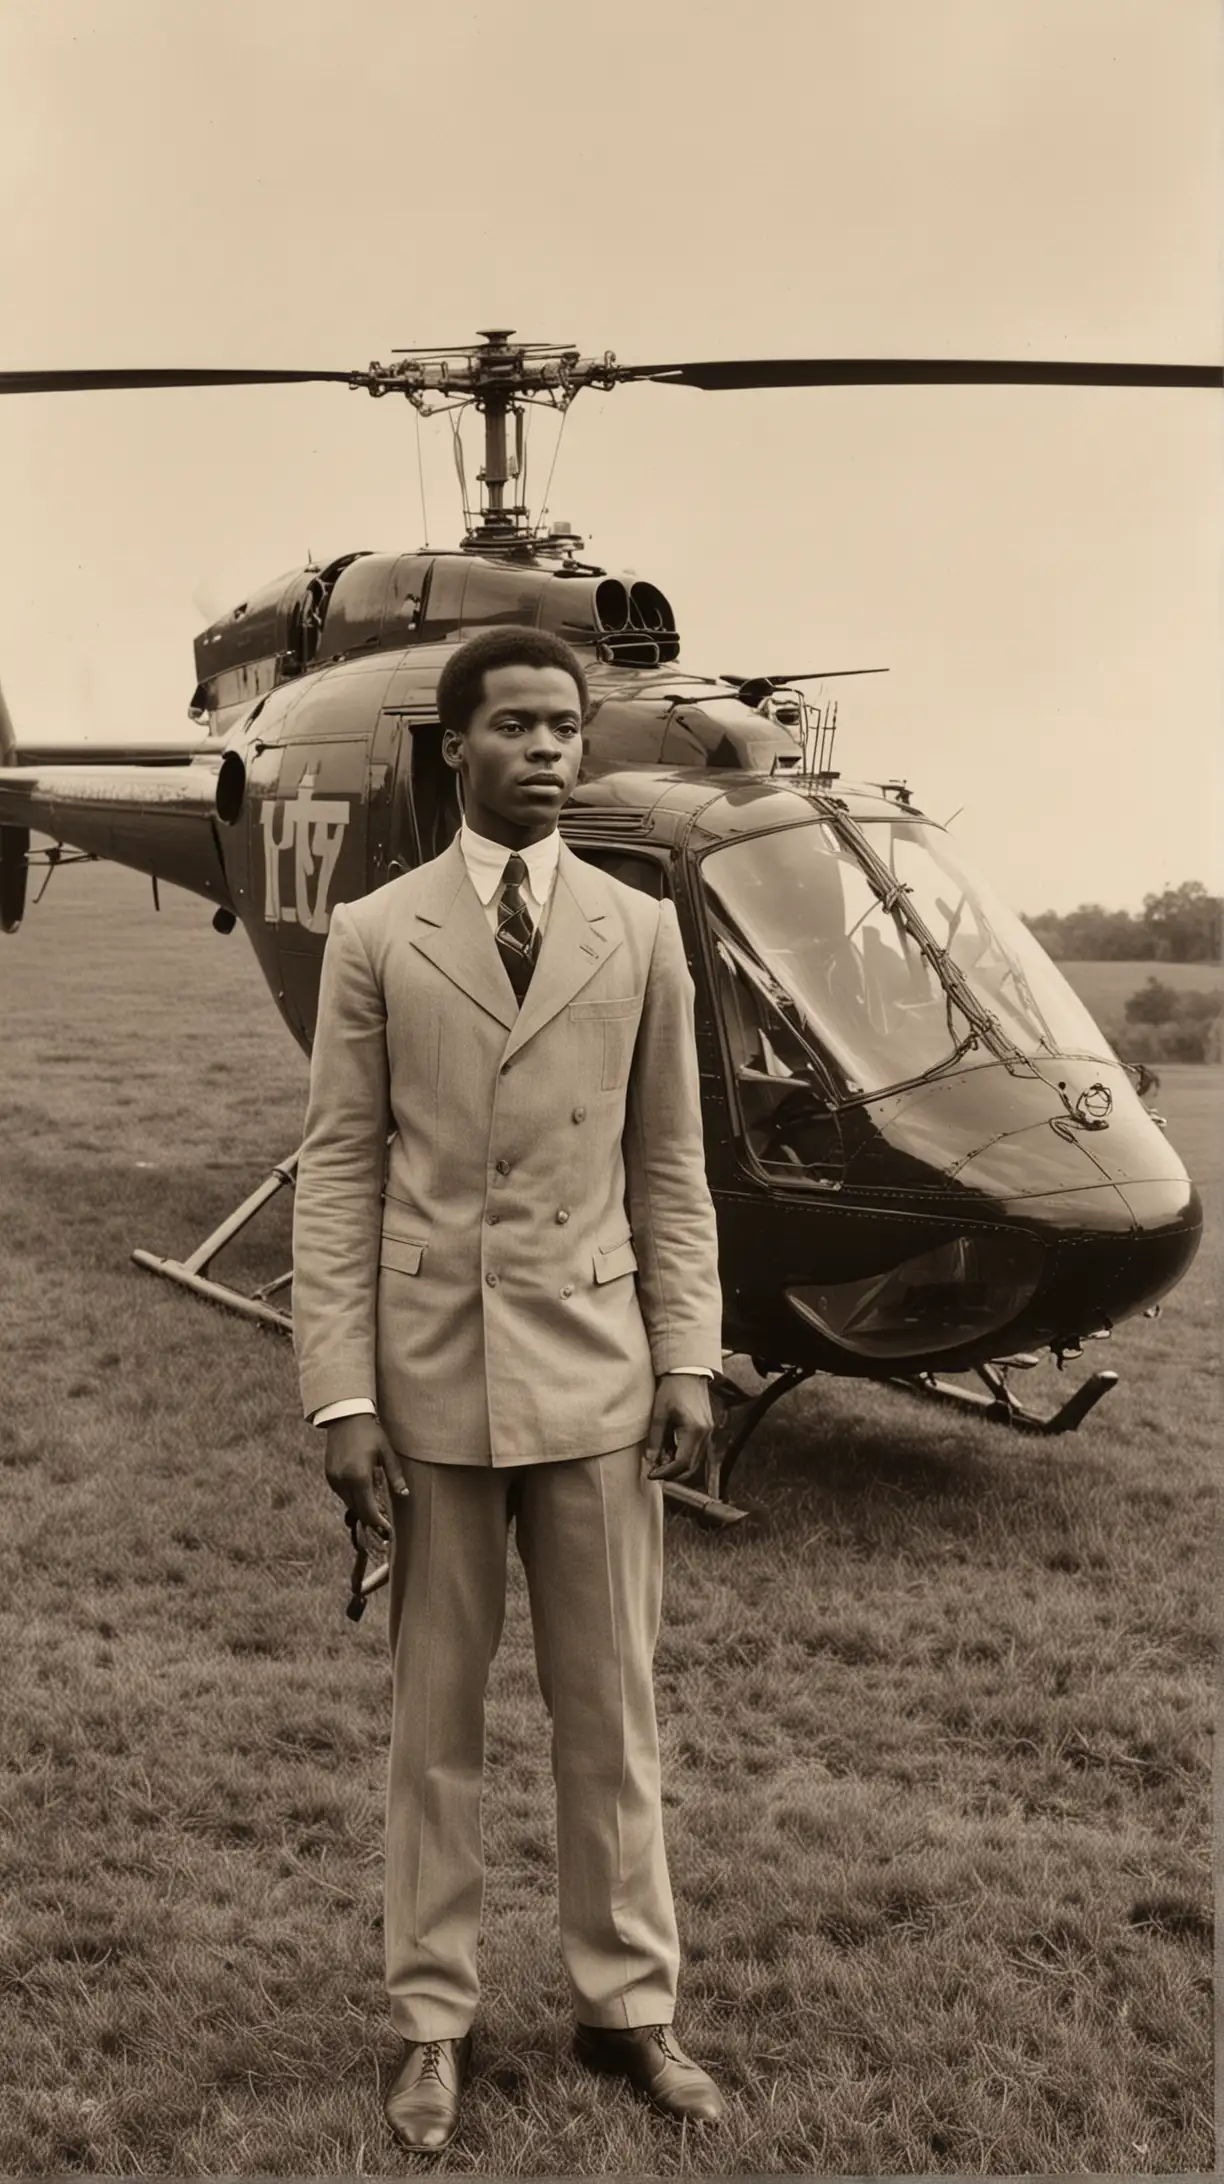 1900s Black Man Posing with Helicopter Outdoors